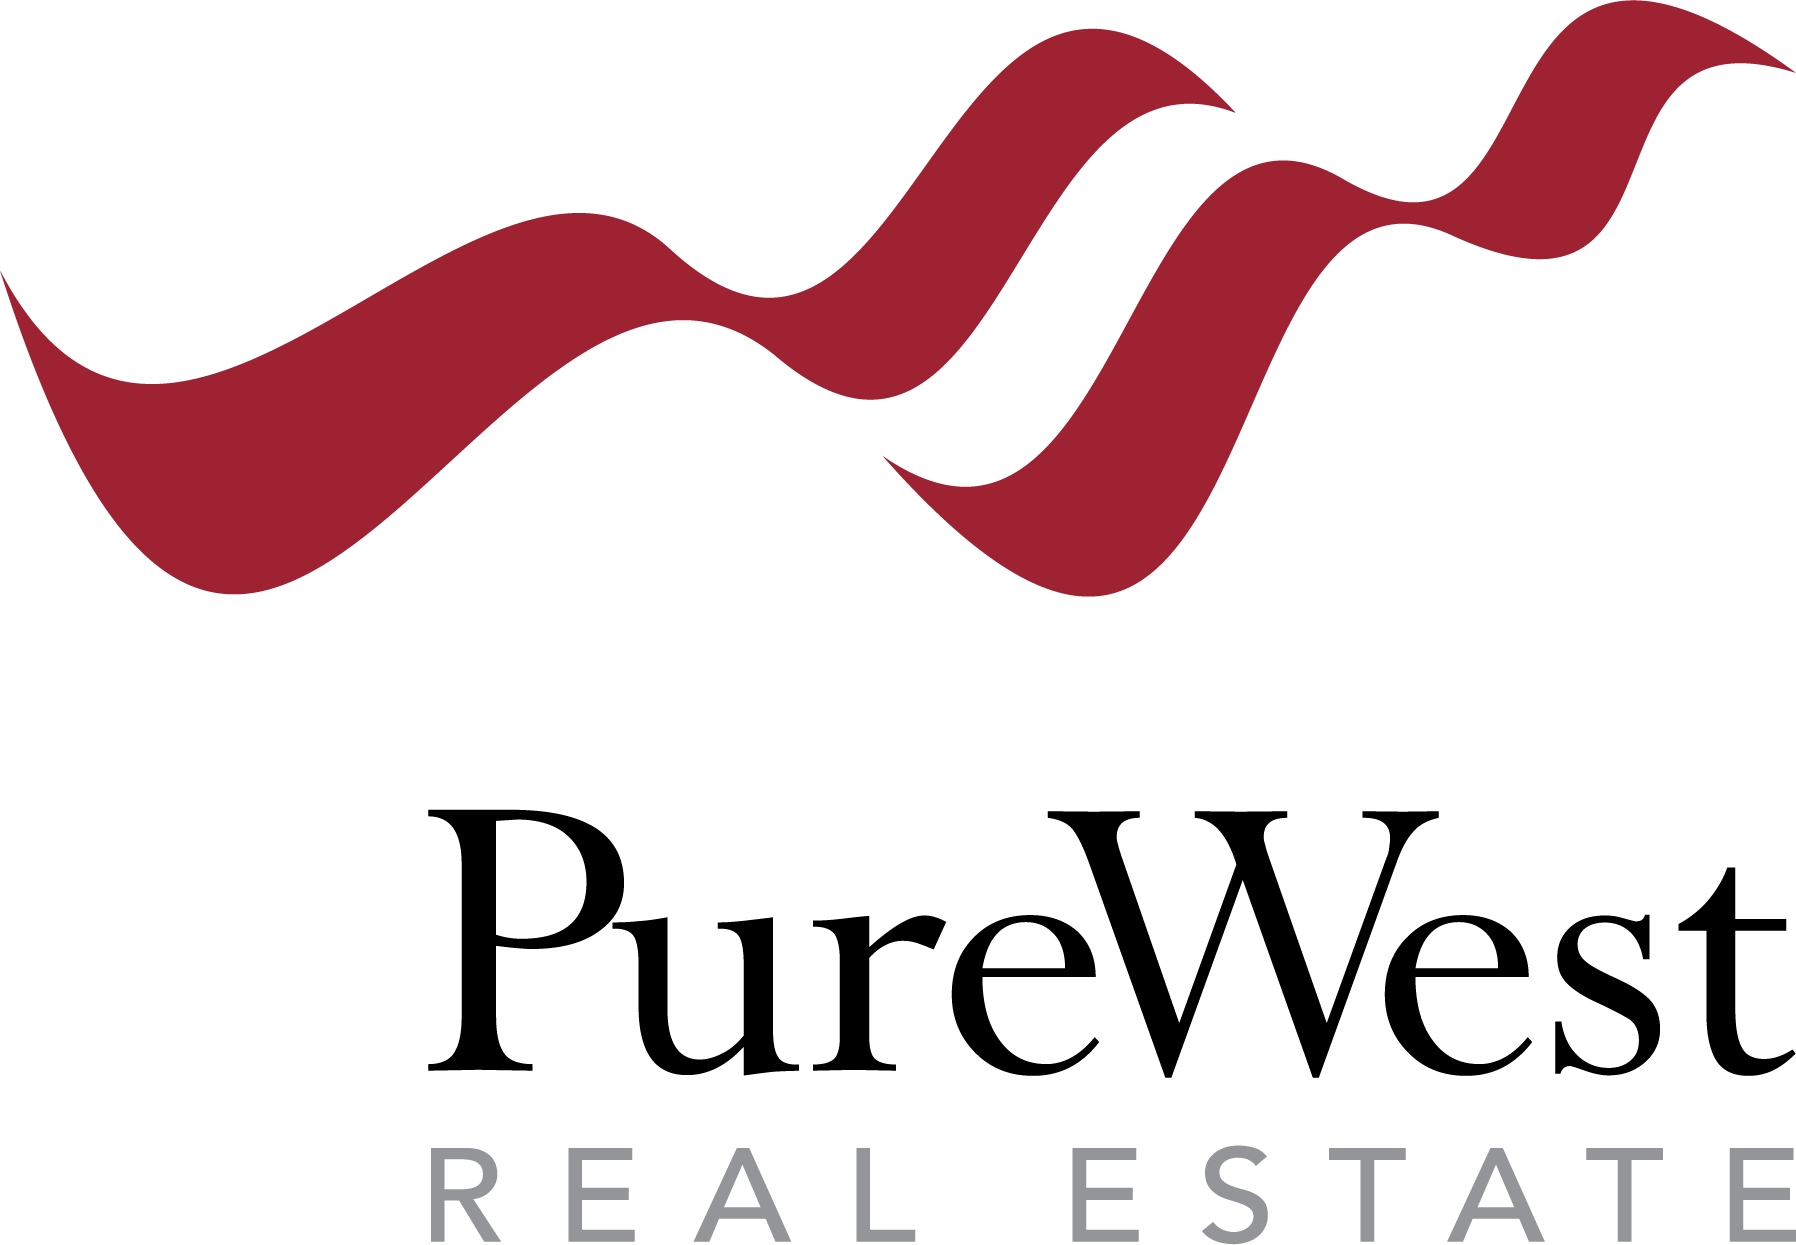 Jerry Reynolds - Pure West Real Estate Logo